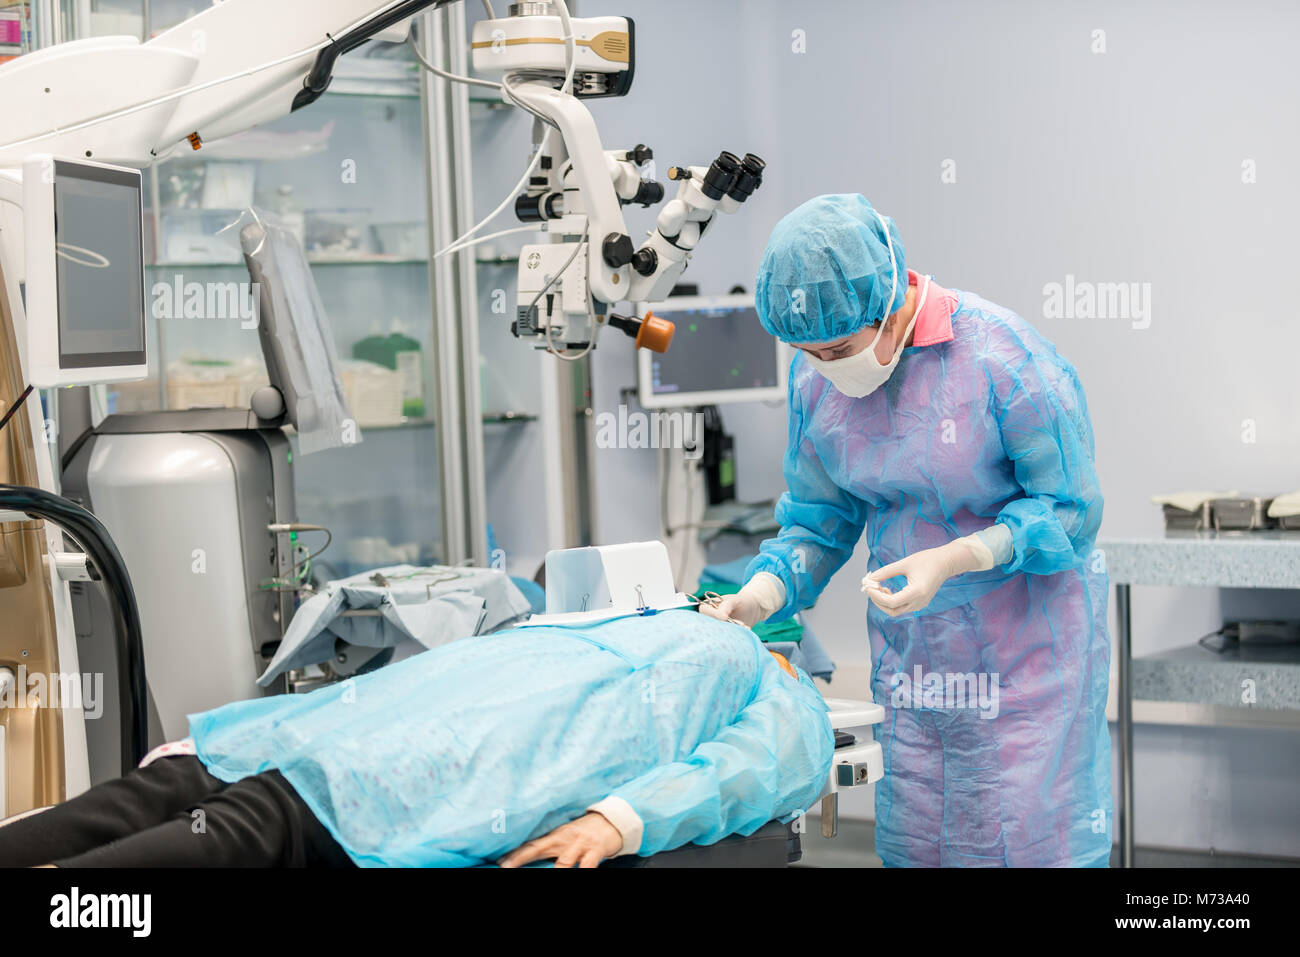 eye surgeons perform surgery on the patient. surgeons at work. medical conceptions Stock Photo